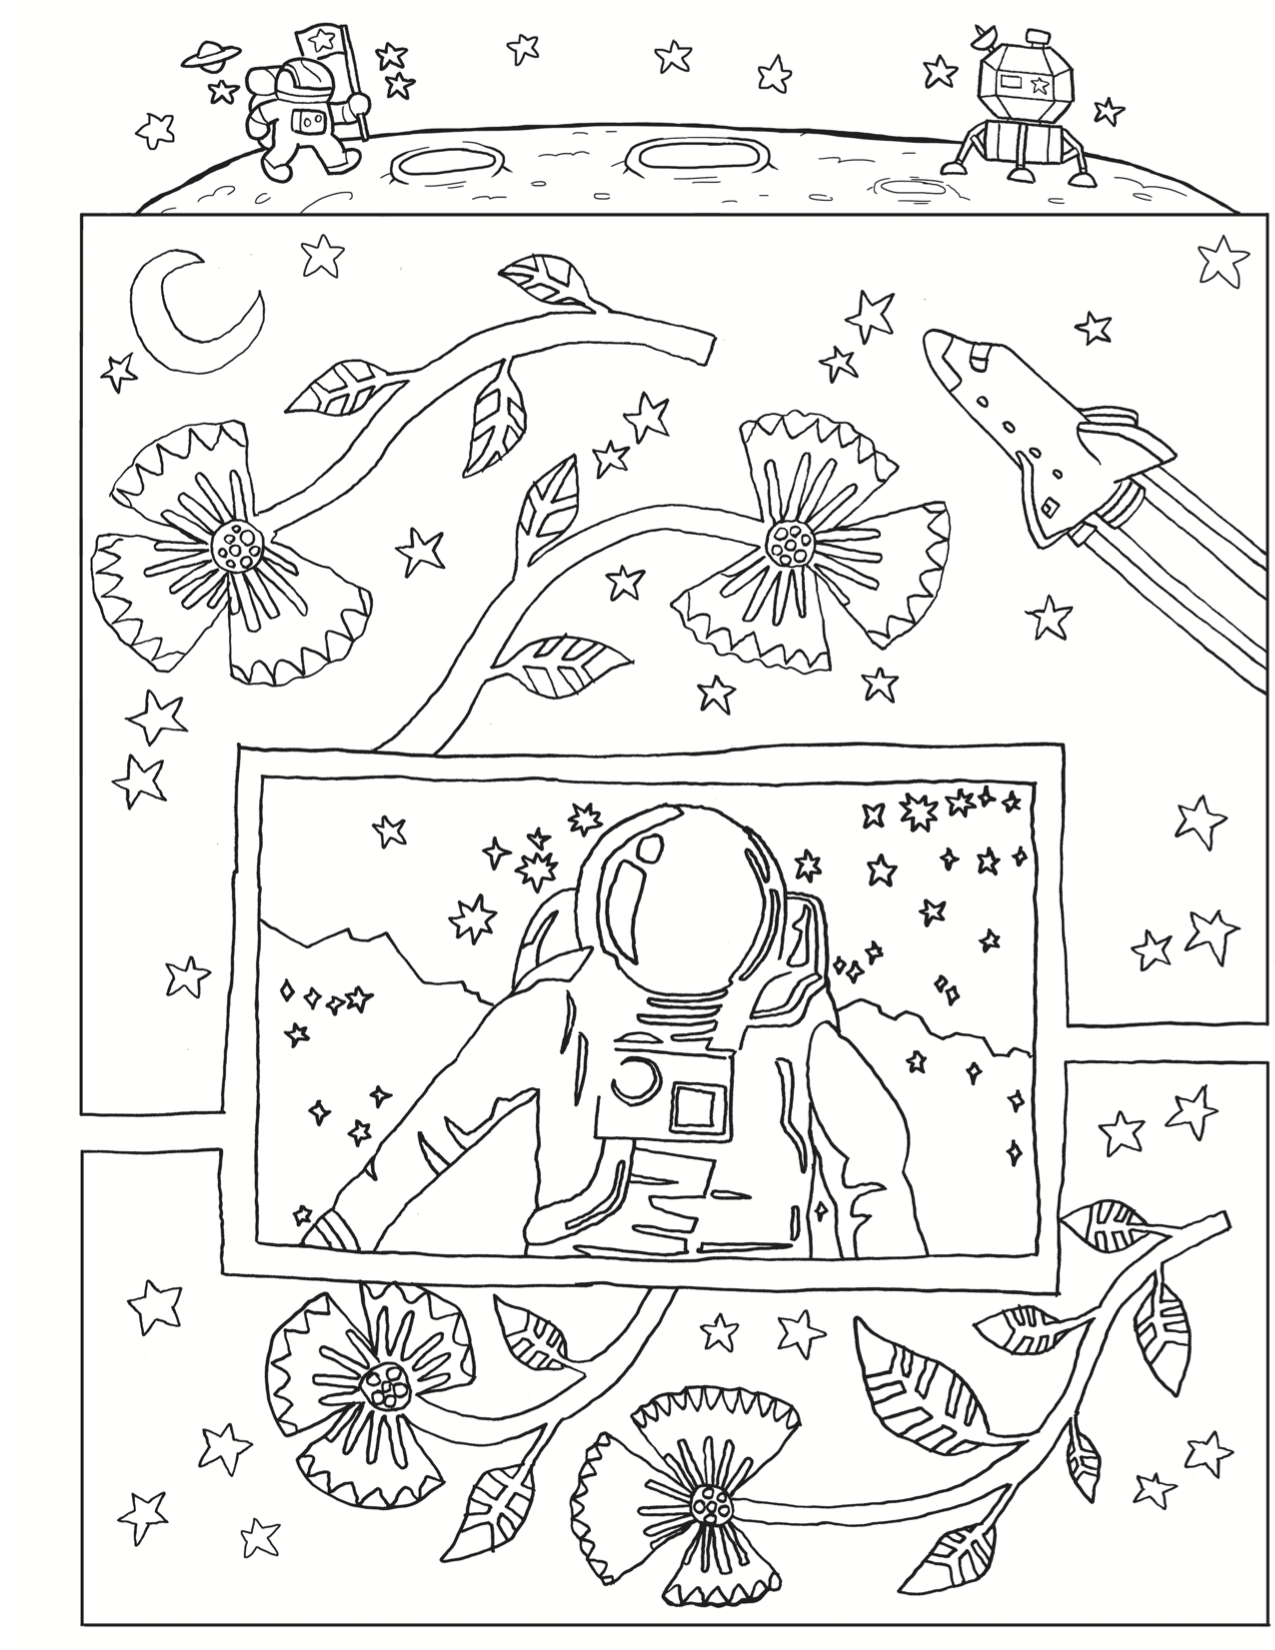 Green Star Movement Coloring Book Page 2.png